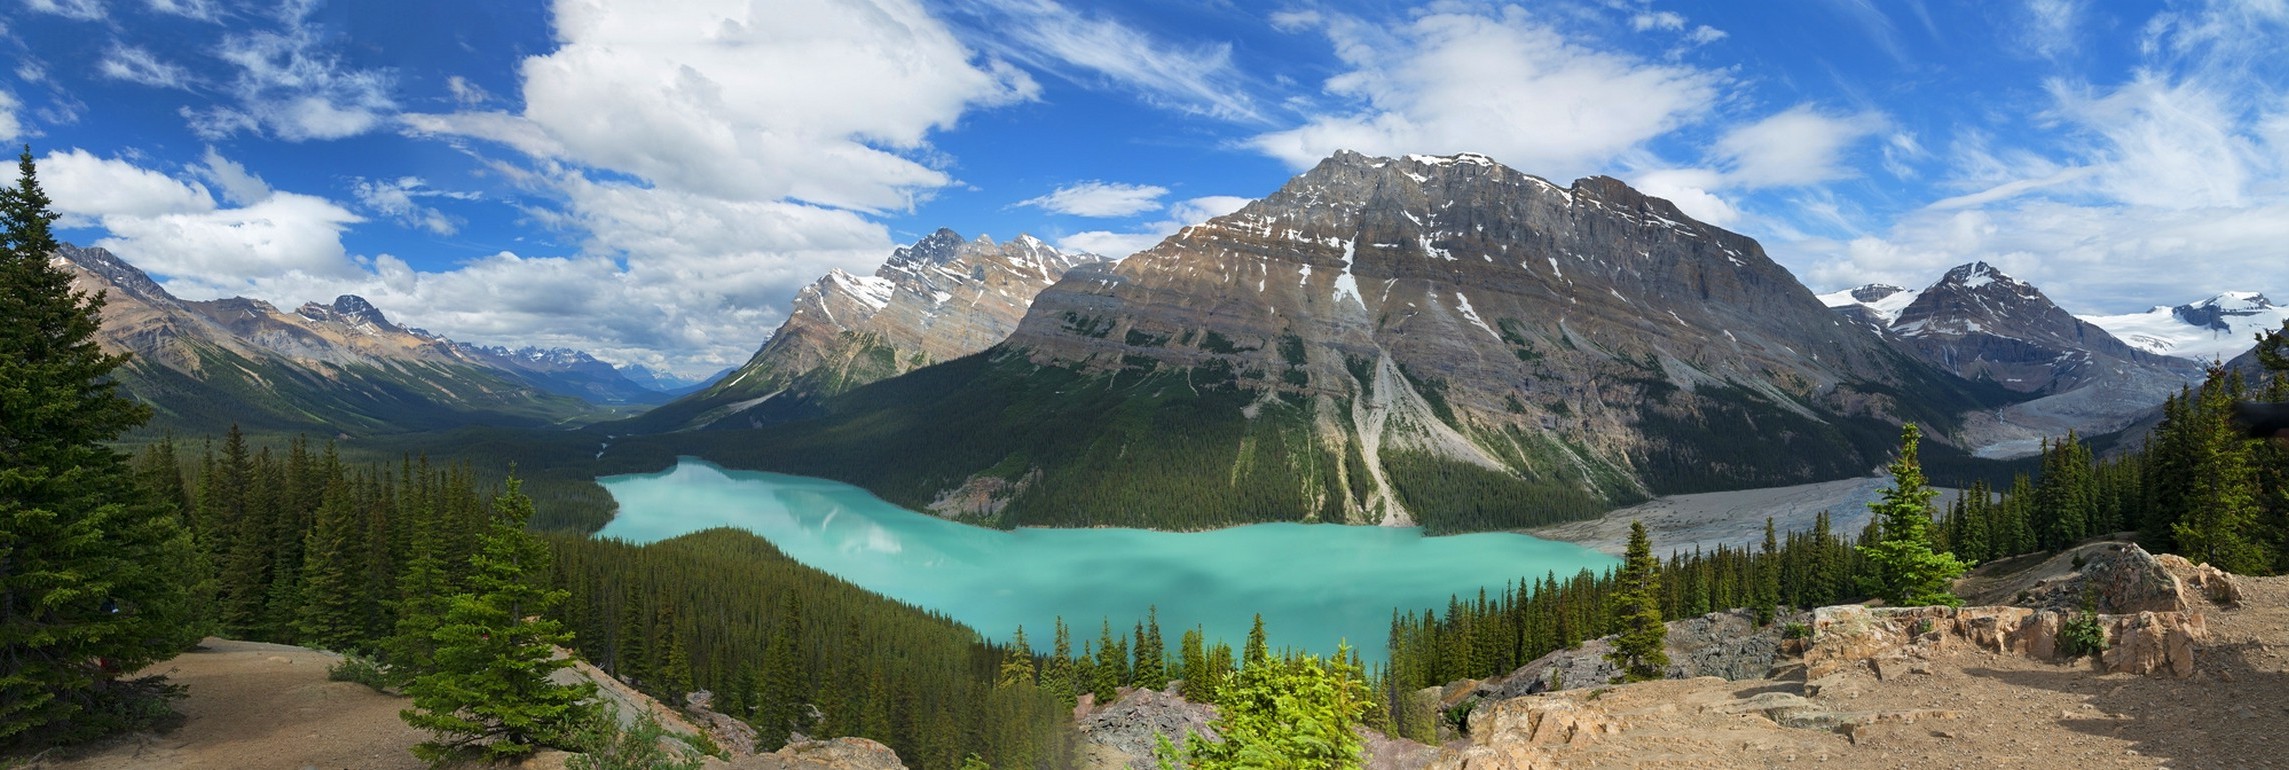 photography, Nature, Landscape, Panorama, Lake, Mountains, Turquoise, Water, Forest, Clouds, Valley, Banff National Park, Alberta, Canada Wallpaper